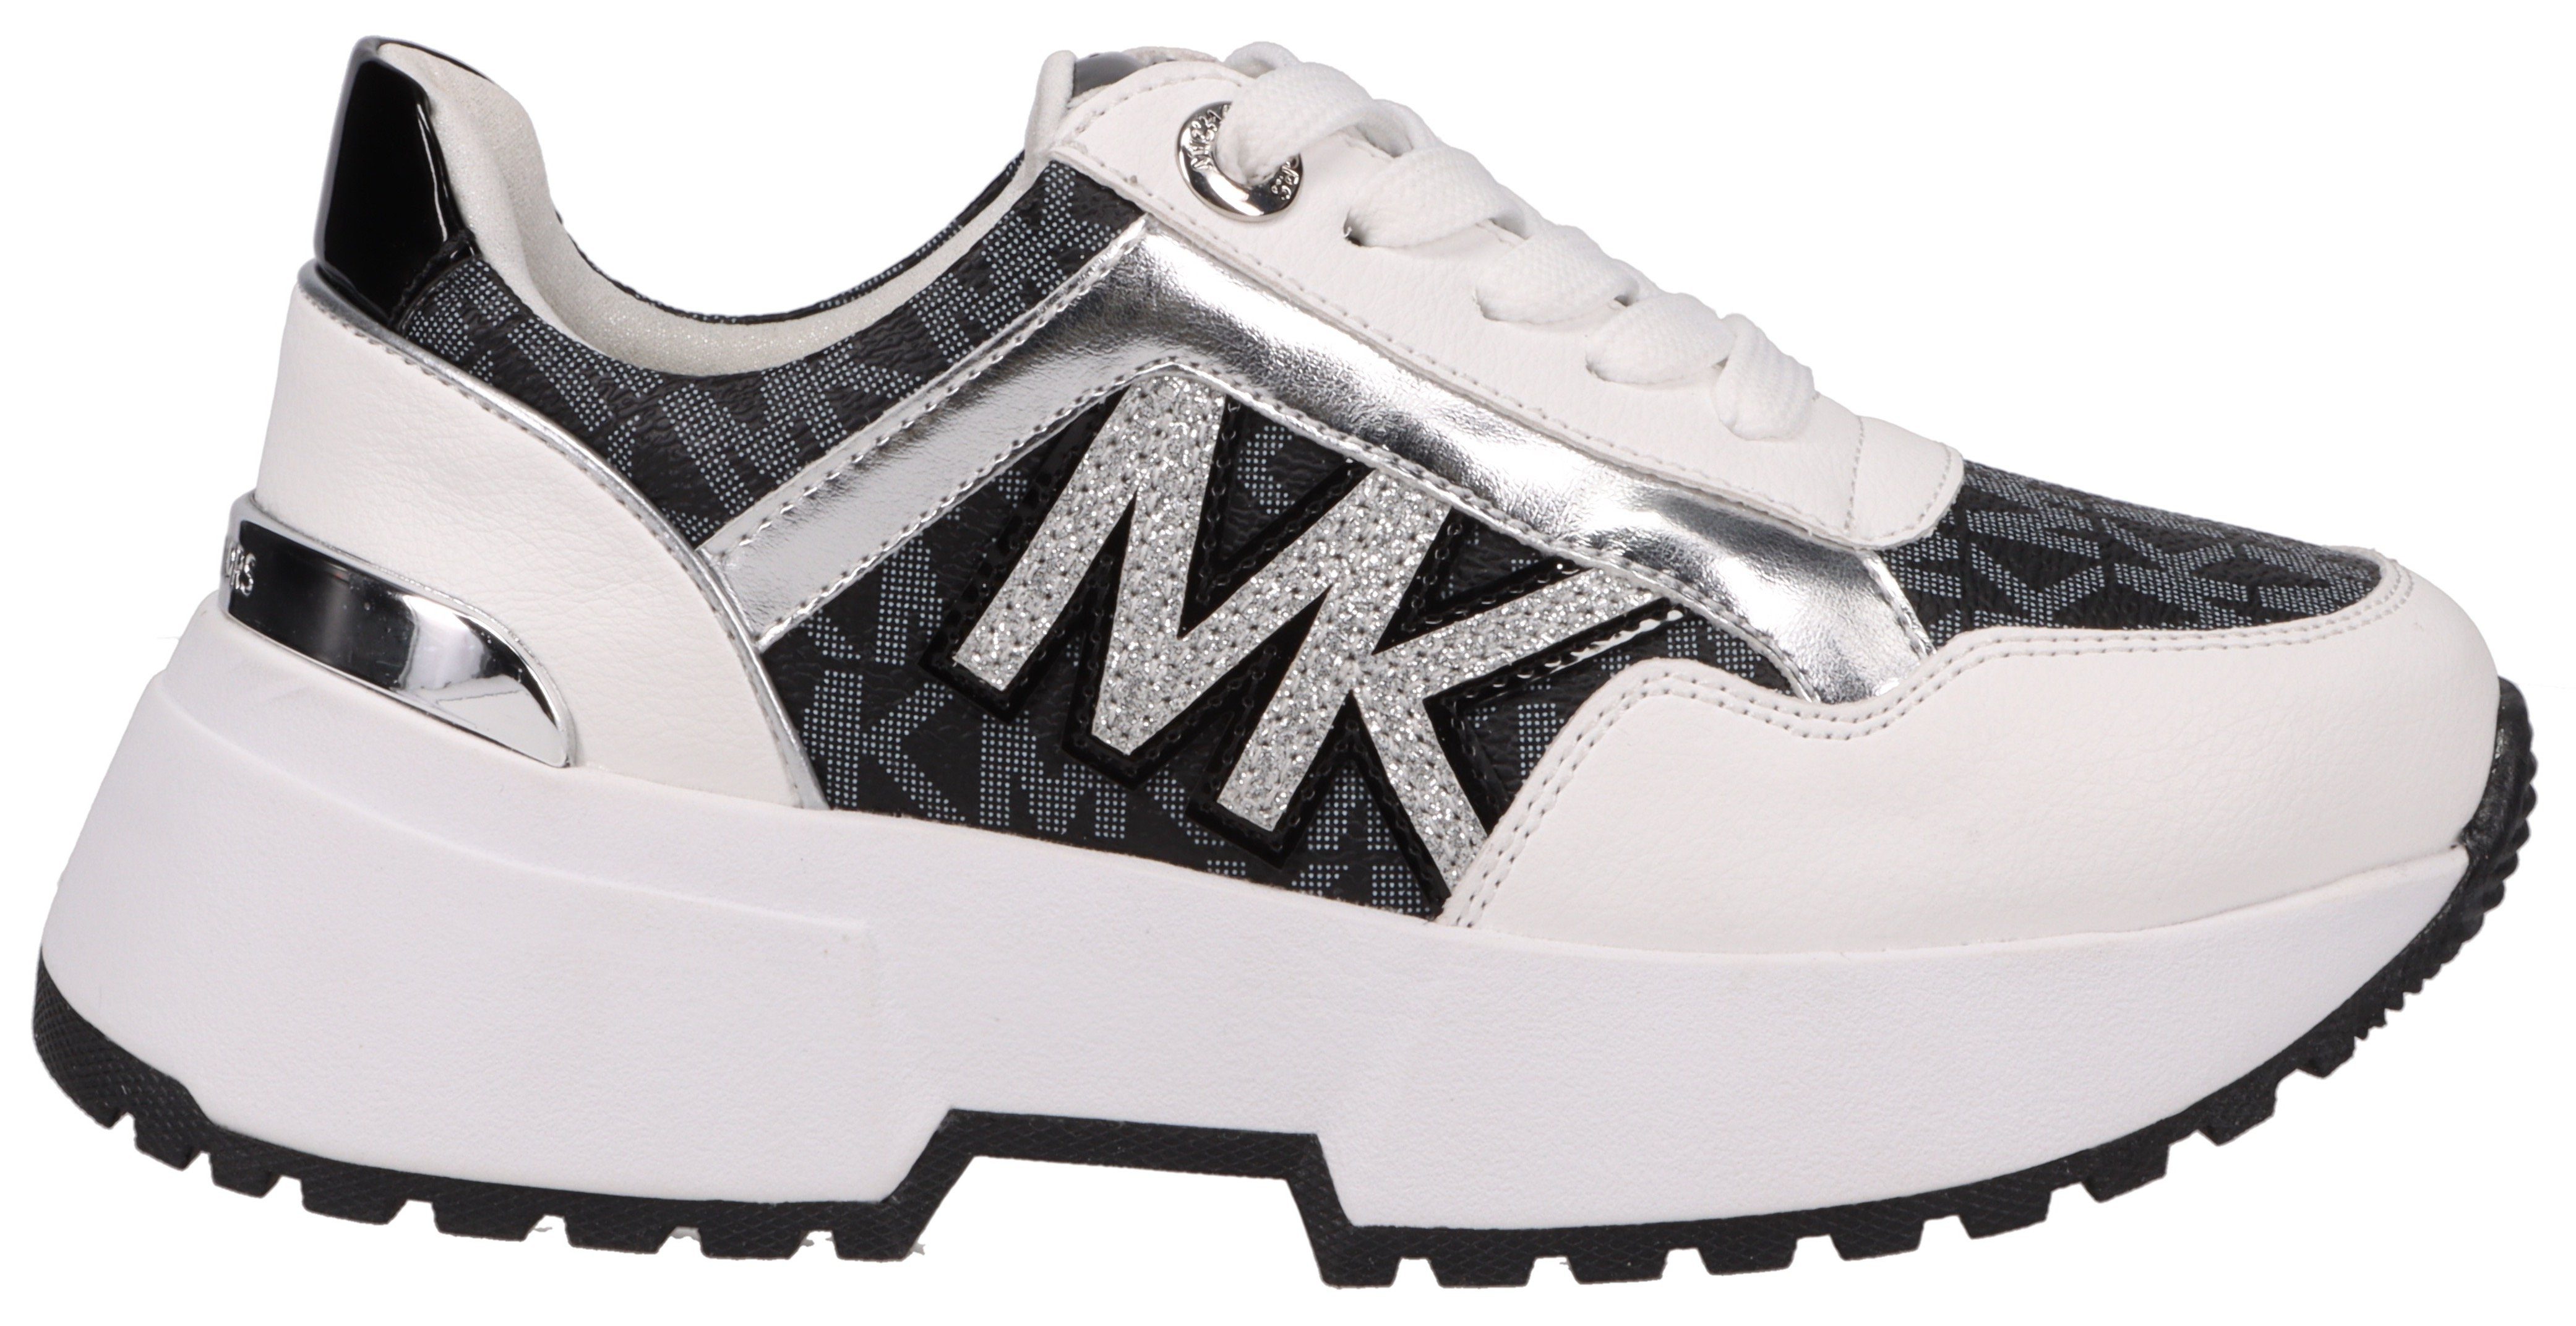 MICHAEL KORS Chunky-Laufsohle Sneaker Maddy Cosmo Plateausneaker mit KIDS